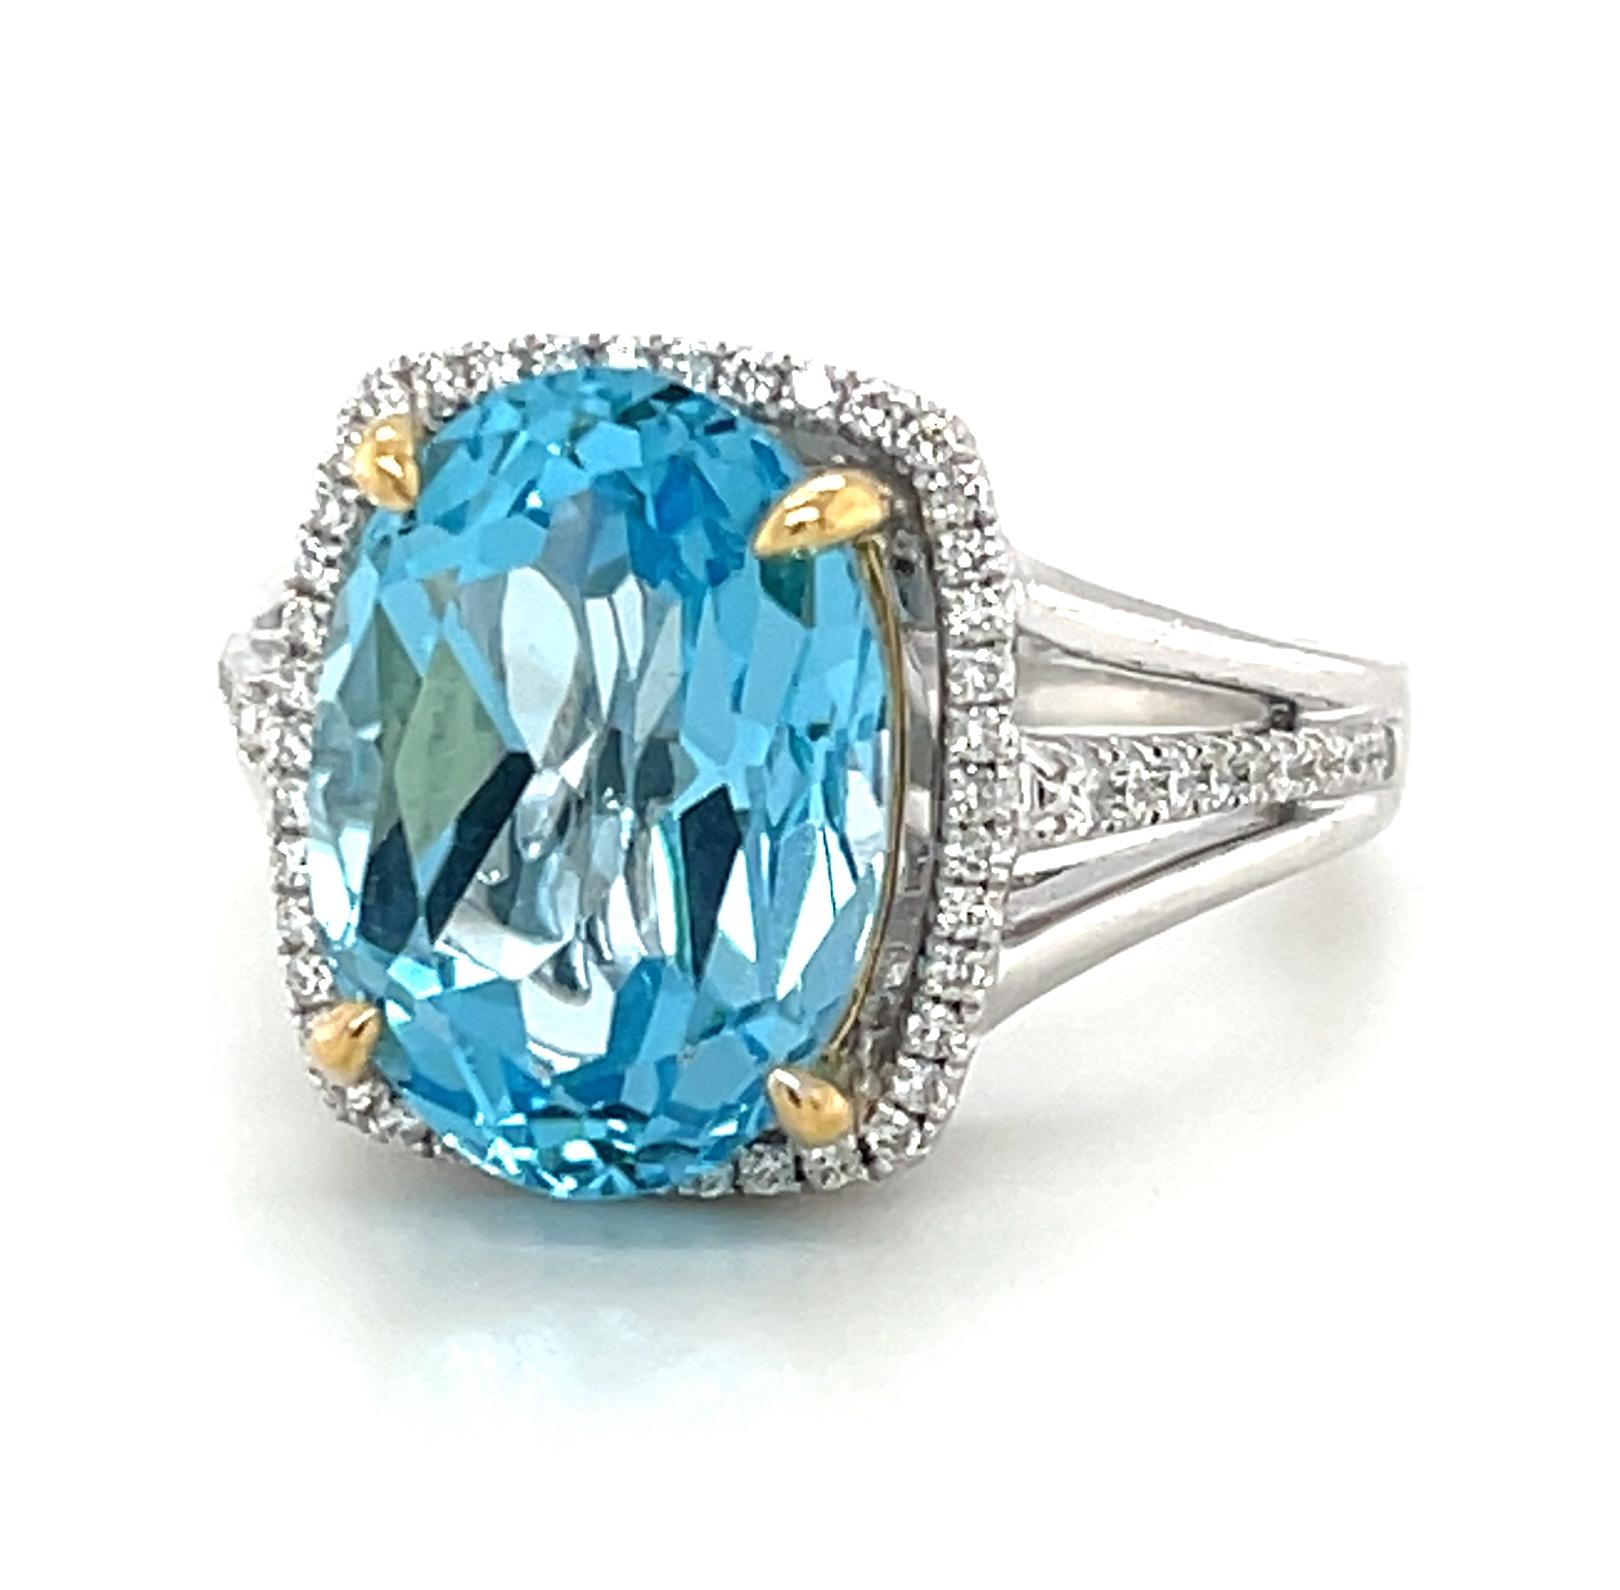 Women's 8.59 Carat Blue Topaz and Diamond Halo Cocktail Ring in White and Yellow Gold For Sale